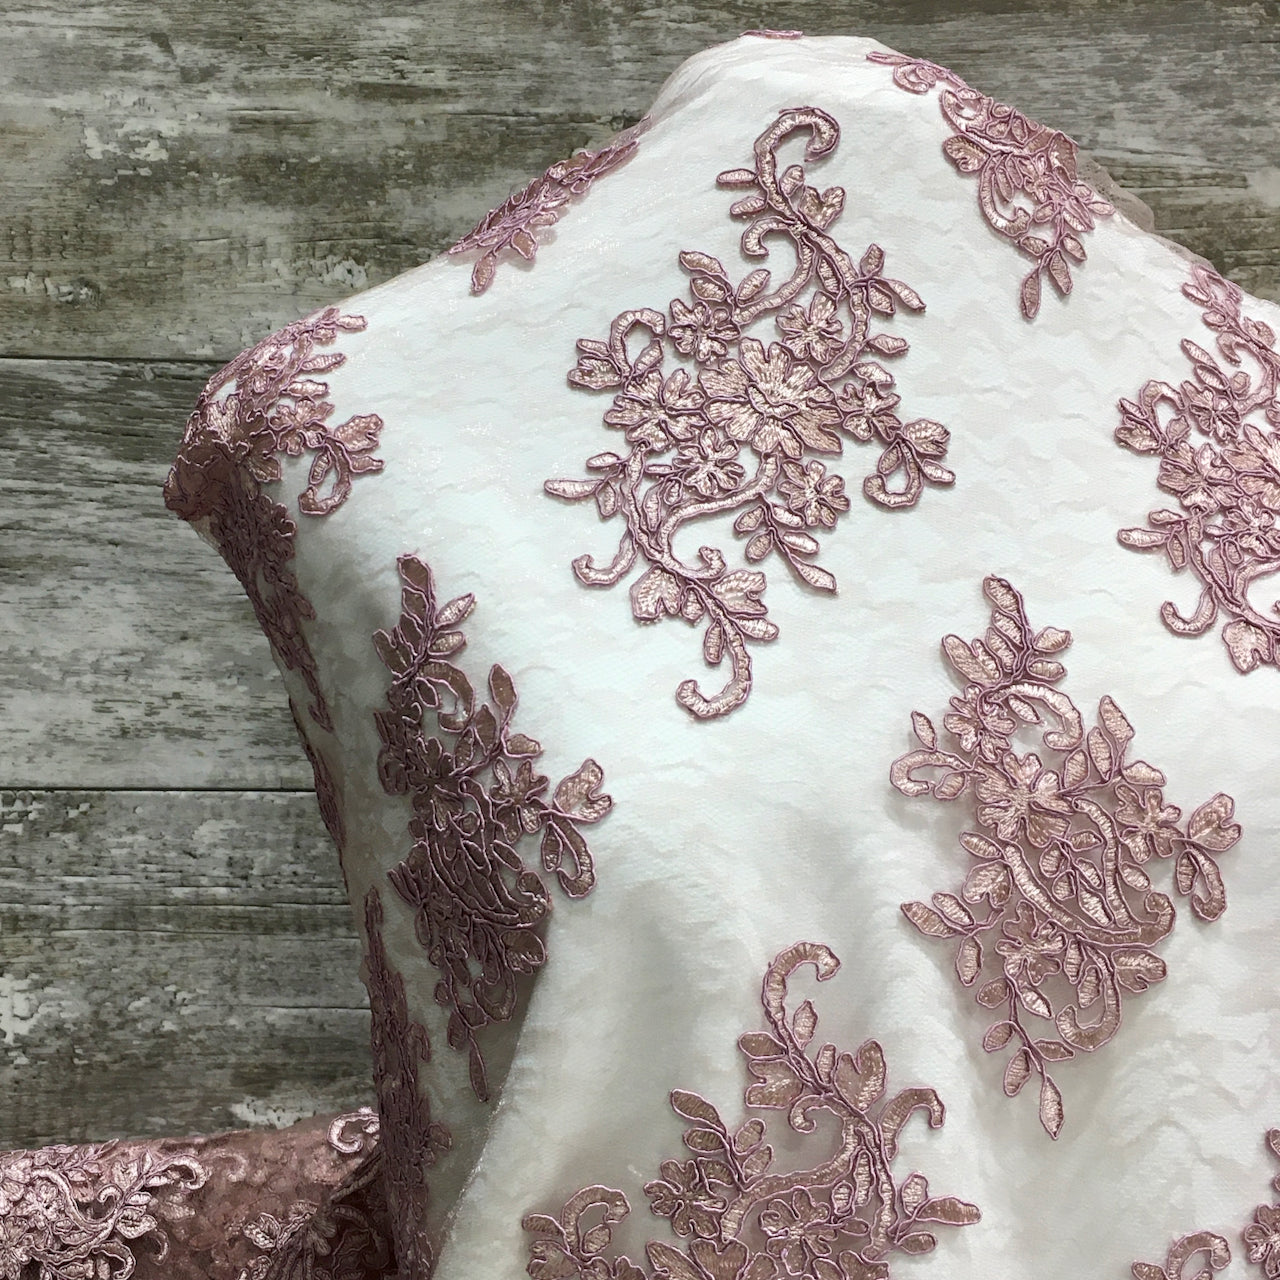 Veronica Embroidery Lace / Dusty Rose - Sold by the half yard